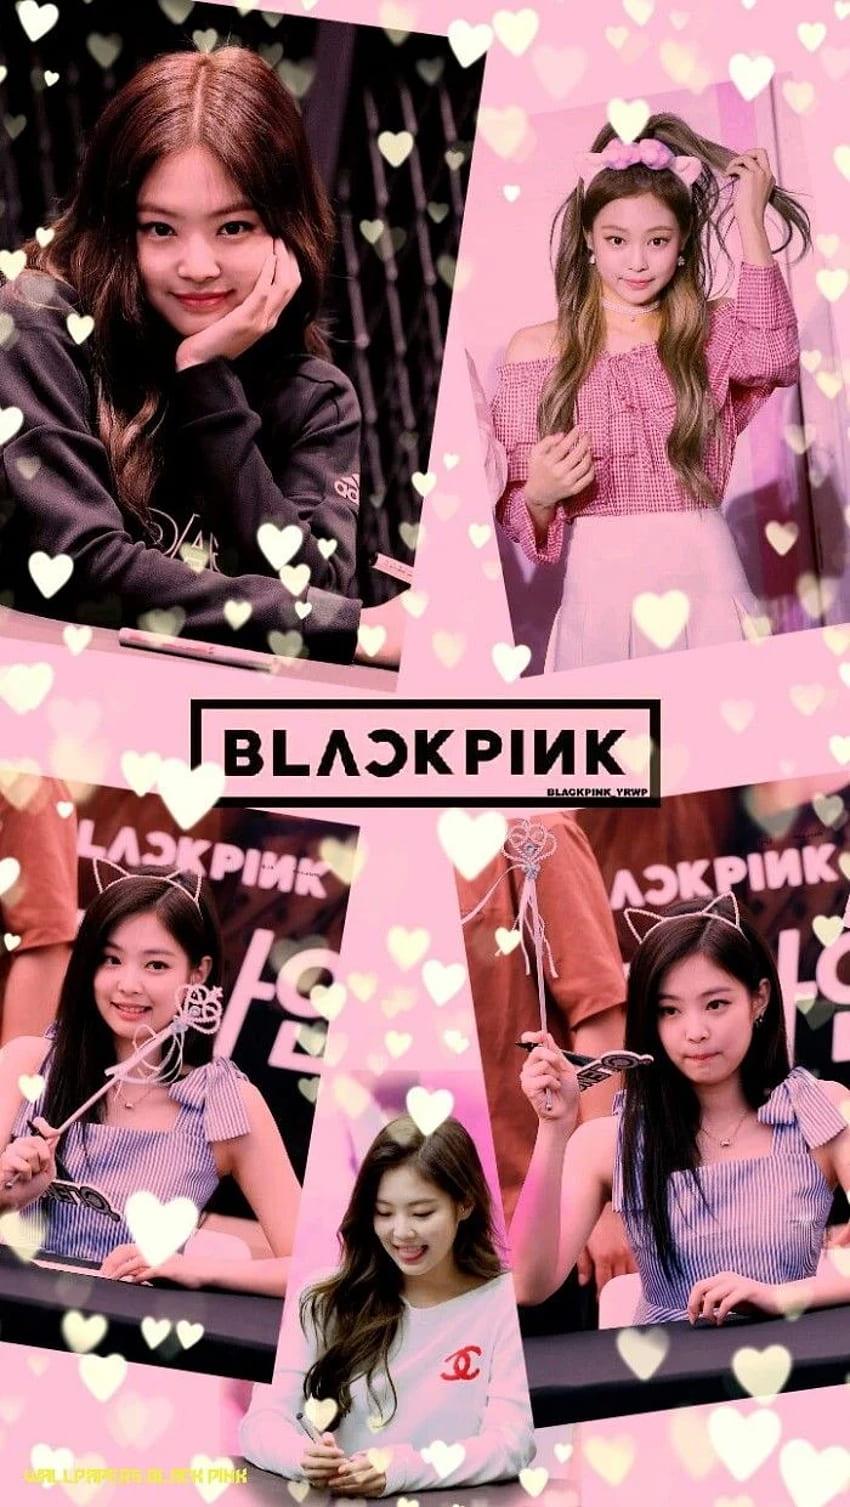 Bts and blackpink Aesthetic wallpaper California theme  Iphone wallpaper  girly Cute wallpapers Blackpink and bts